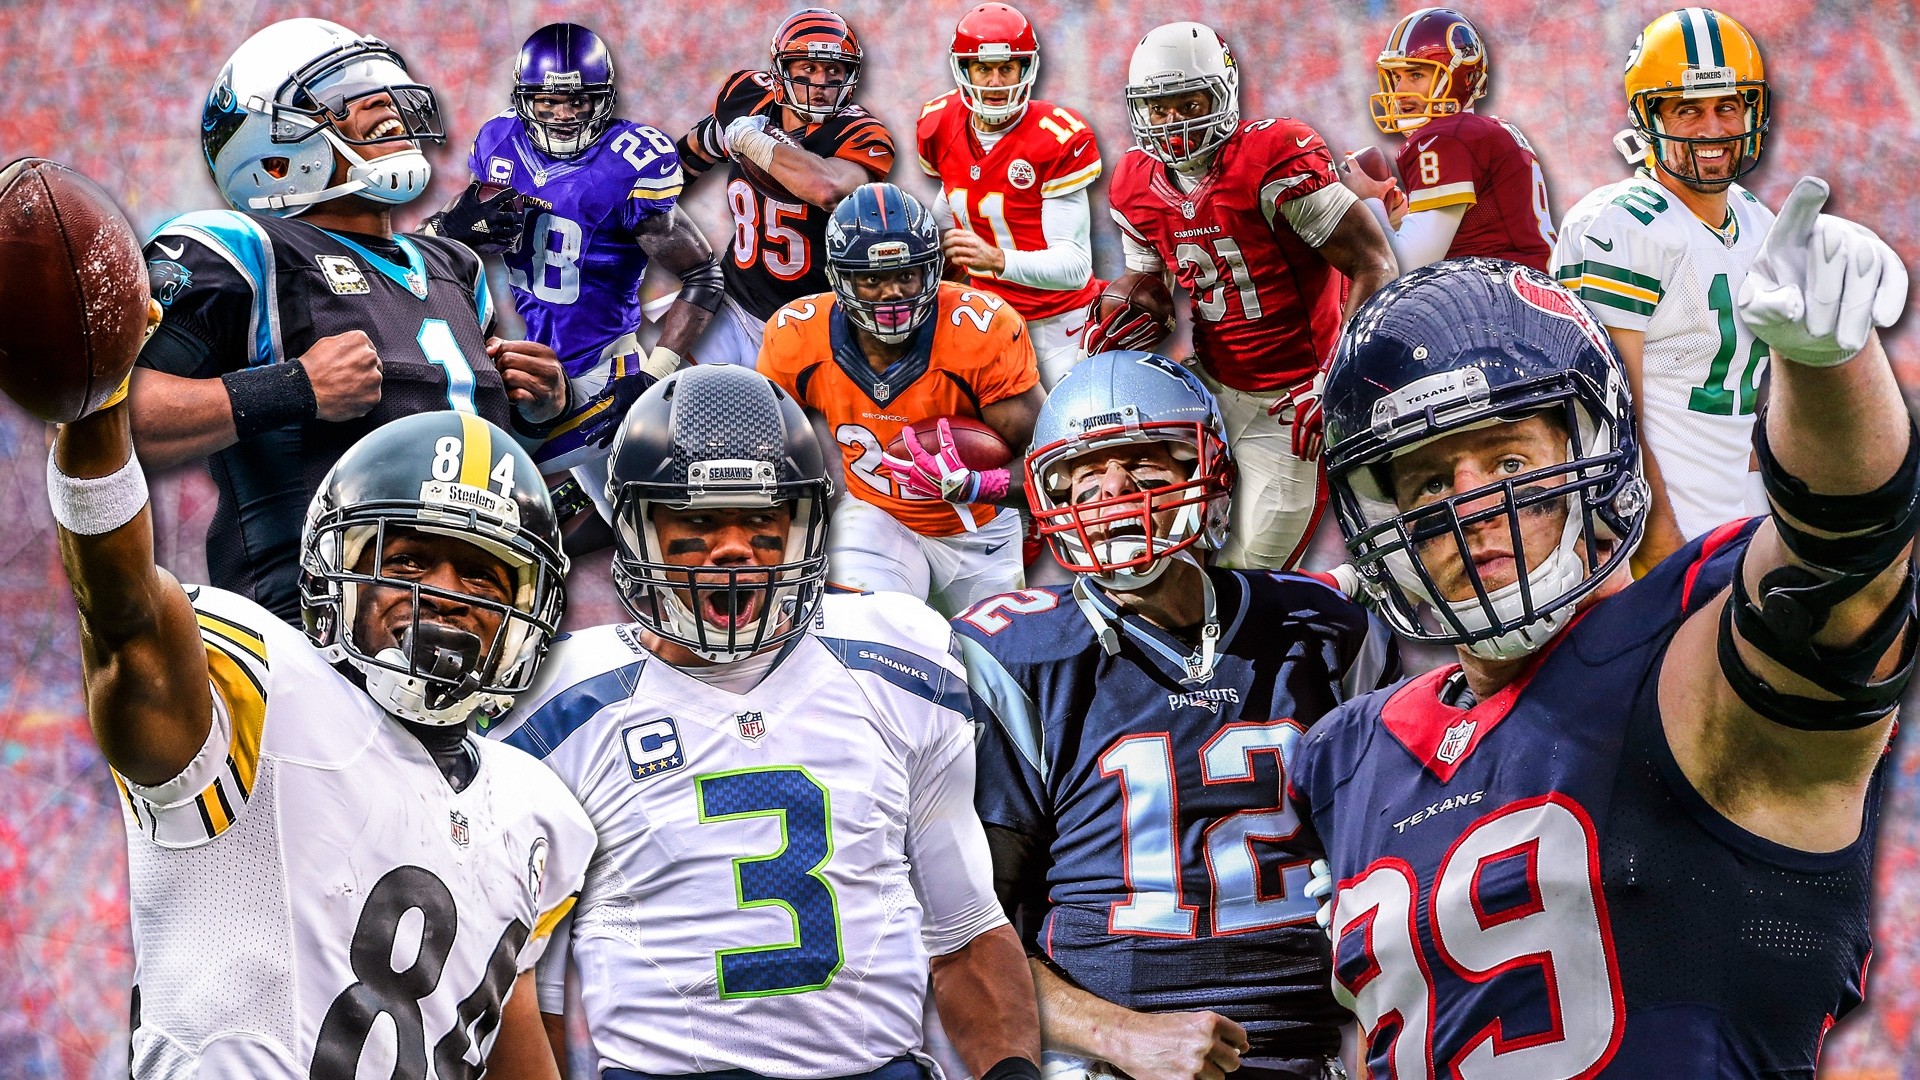 NFL Backgrounds HD 1920x1080